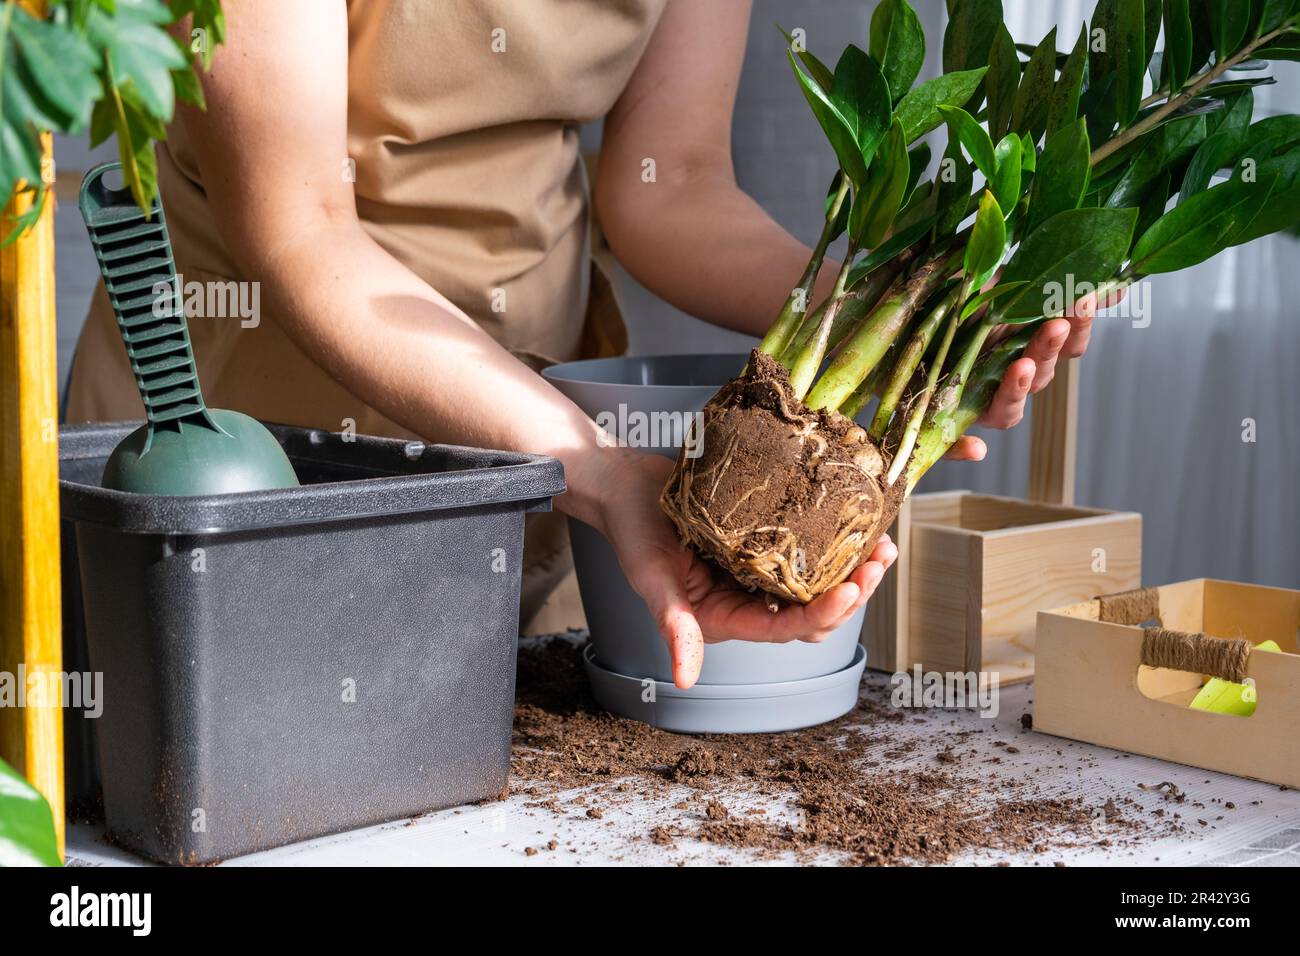 Repotting overgrown home plant succulent Zamioculcas with a lump of roots and bulb into new bigger pot. Caring for potted plant, hands of woman in apr Stock Photo